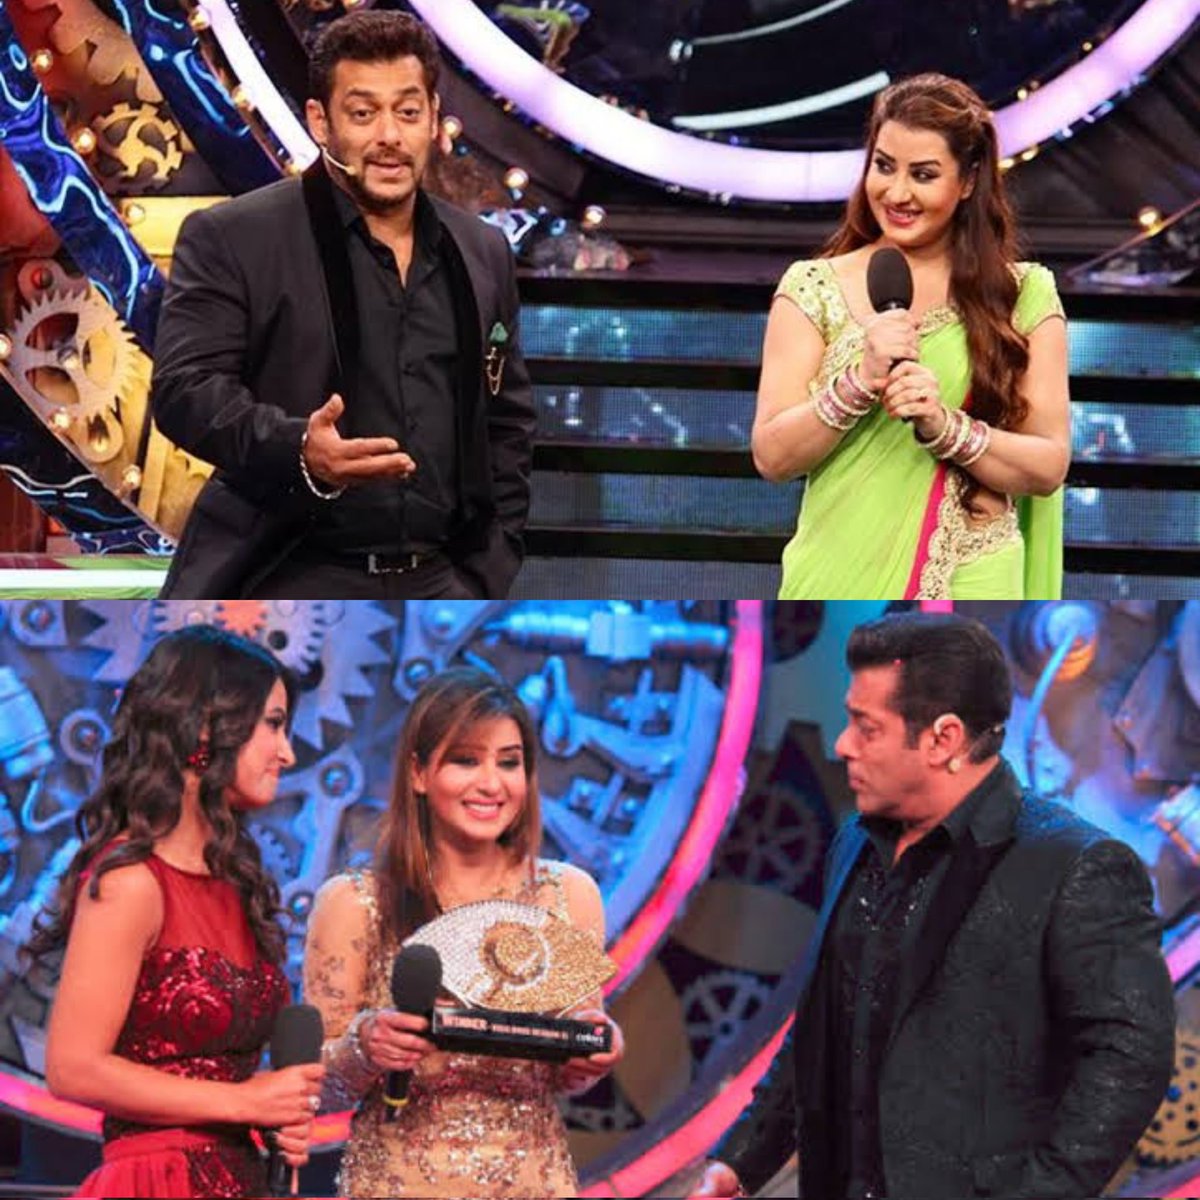 The reason I joined twitter was to participate in her trends and to make her the winner of #BiggBoss11

For me she's still the best ever contestant and the best winner in the history of #BiggBoss

Congratulations to #ShilpaShinde and #Shilpians

4YRS OF BEST BB WINNER SHILPA